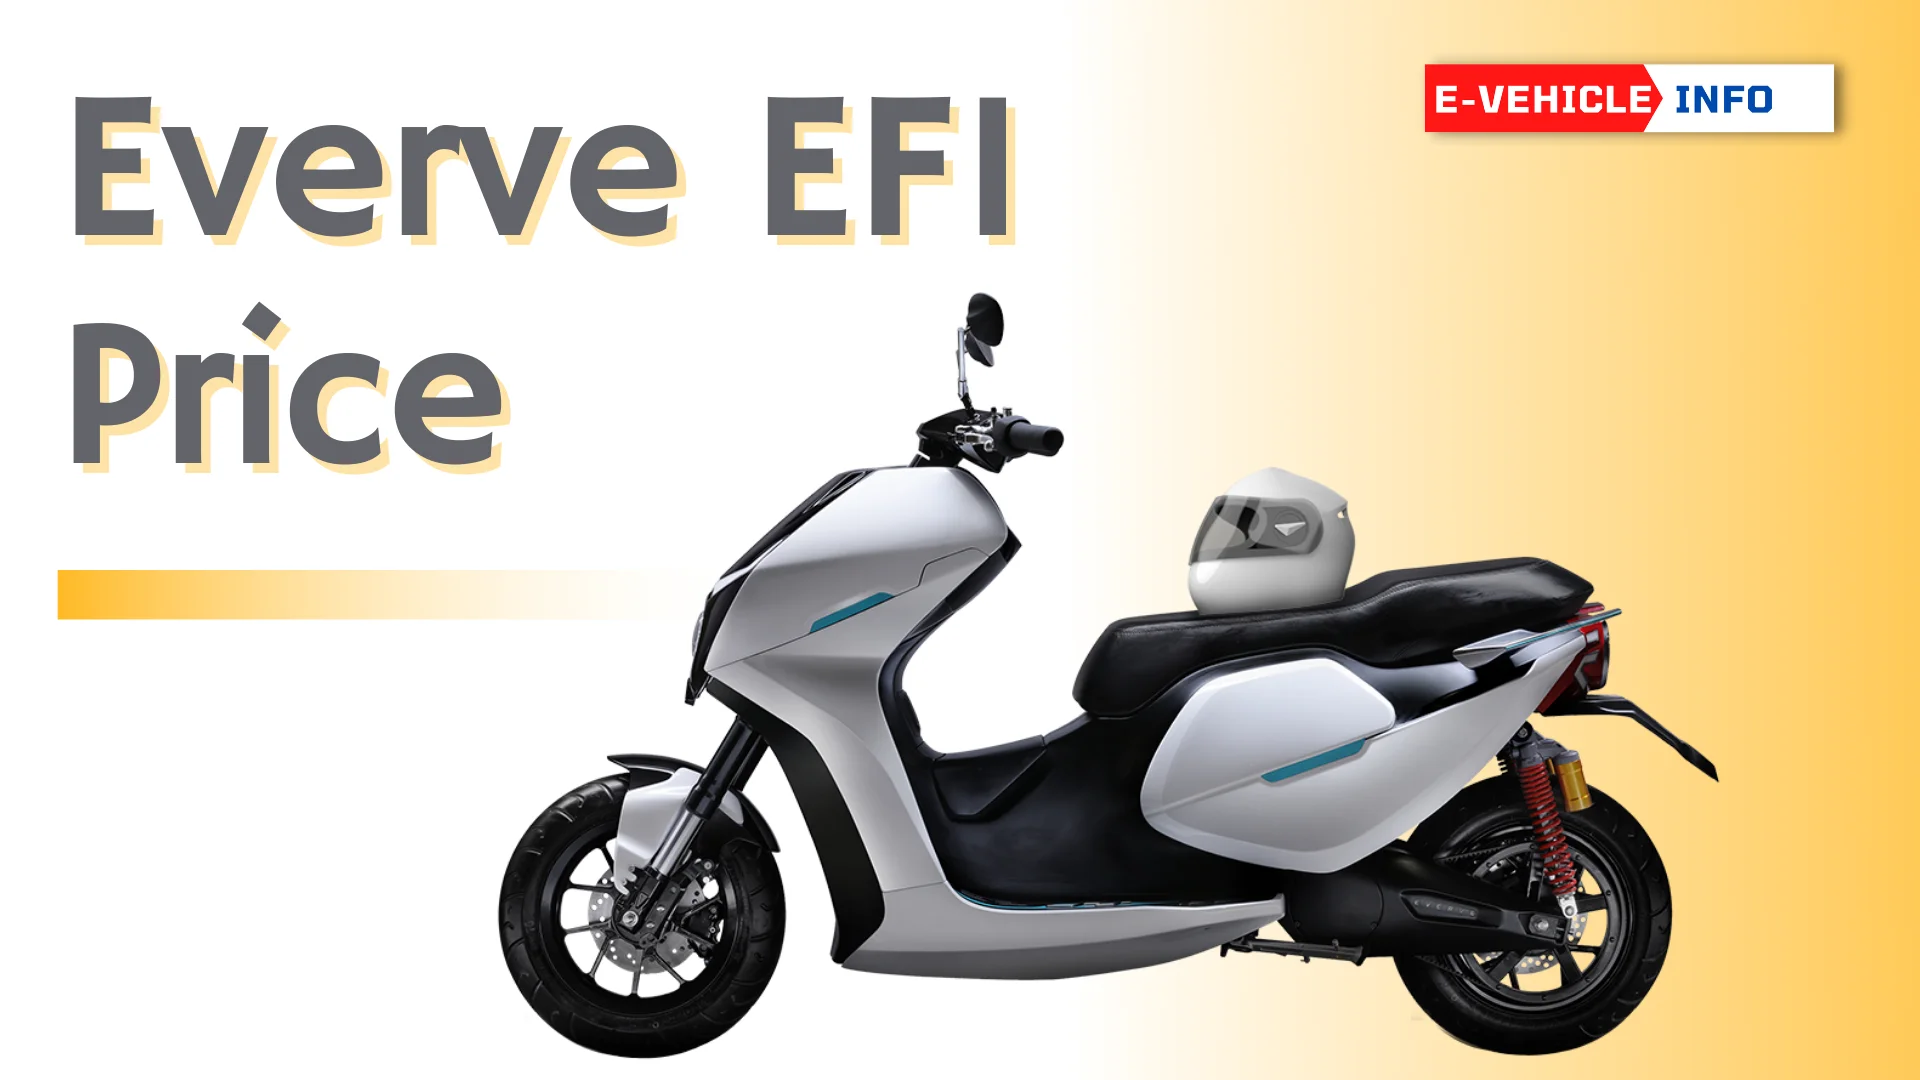 https://e-vehicleinfo.com/everve-ef1-price-range-top-speed-and-launch-date/